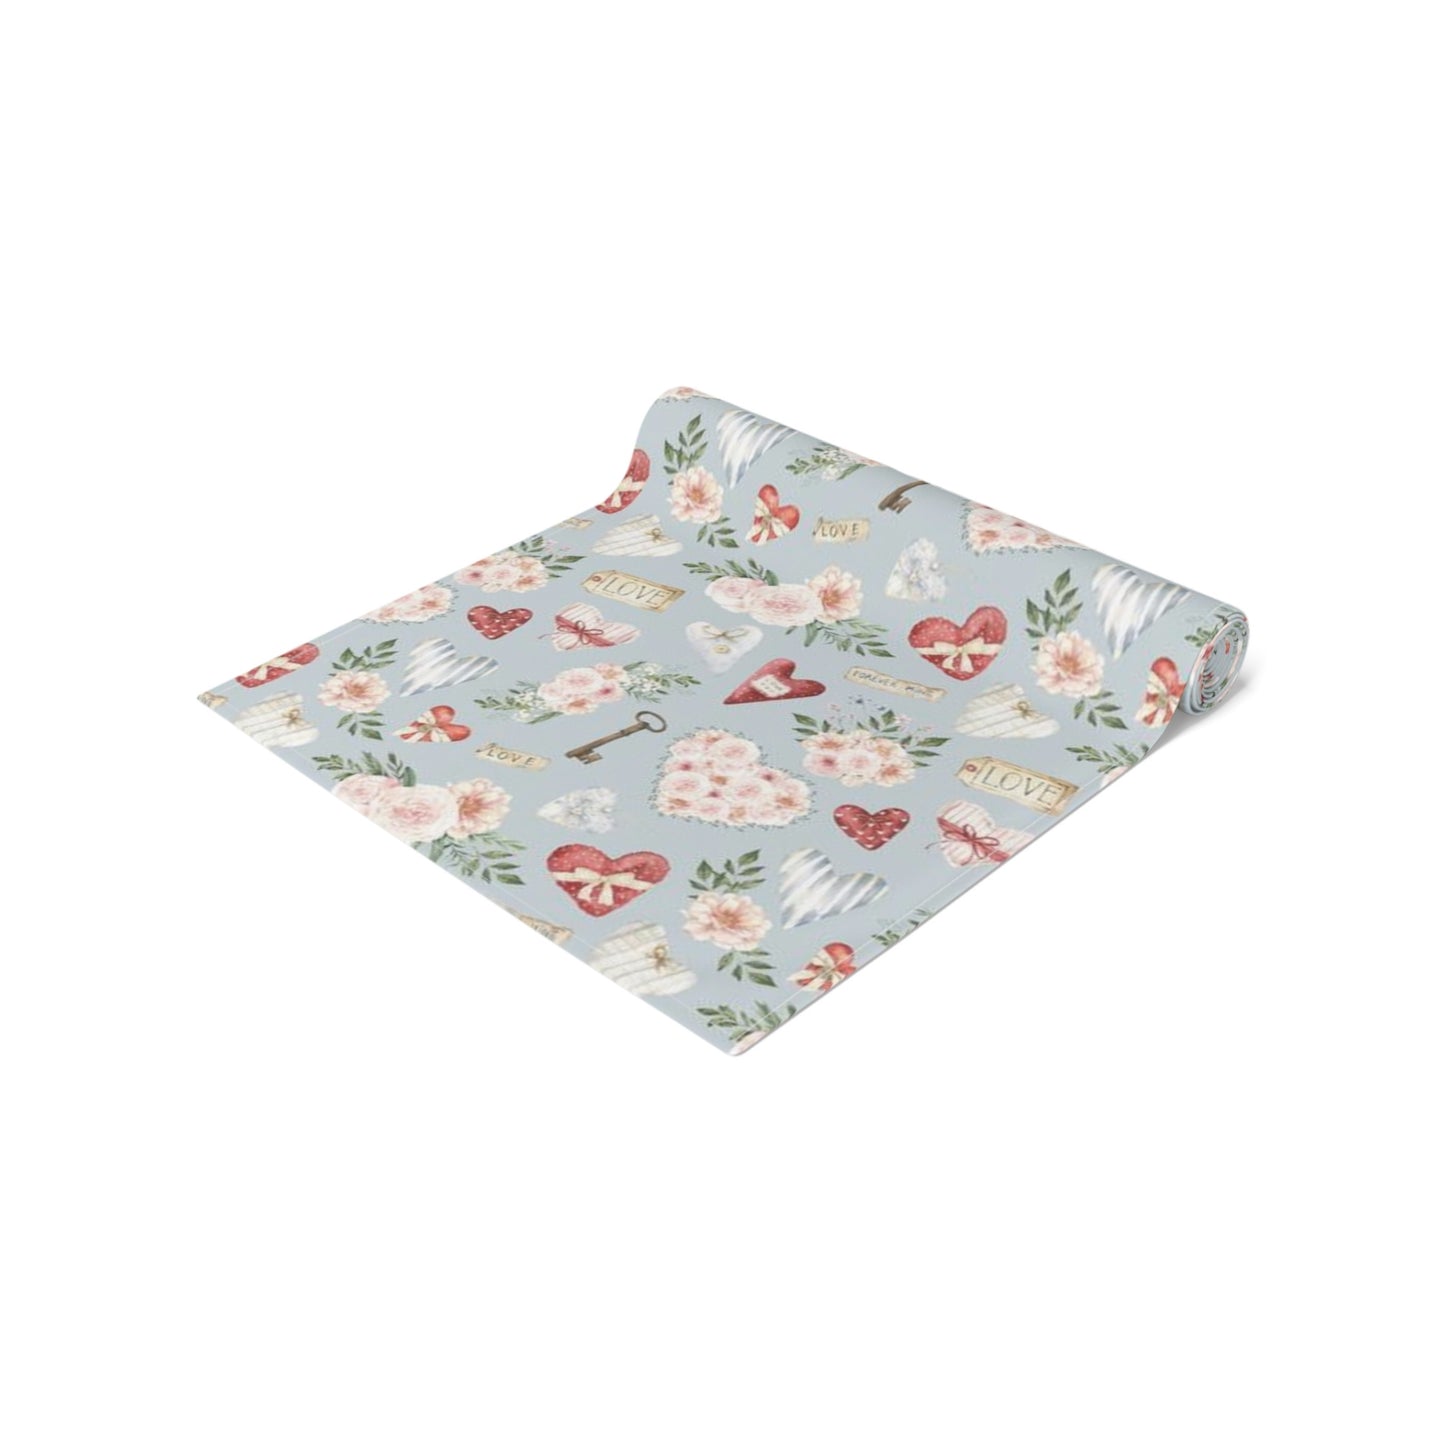 a blue place mat with flowers and birds on it